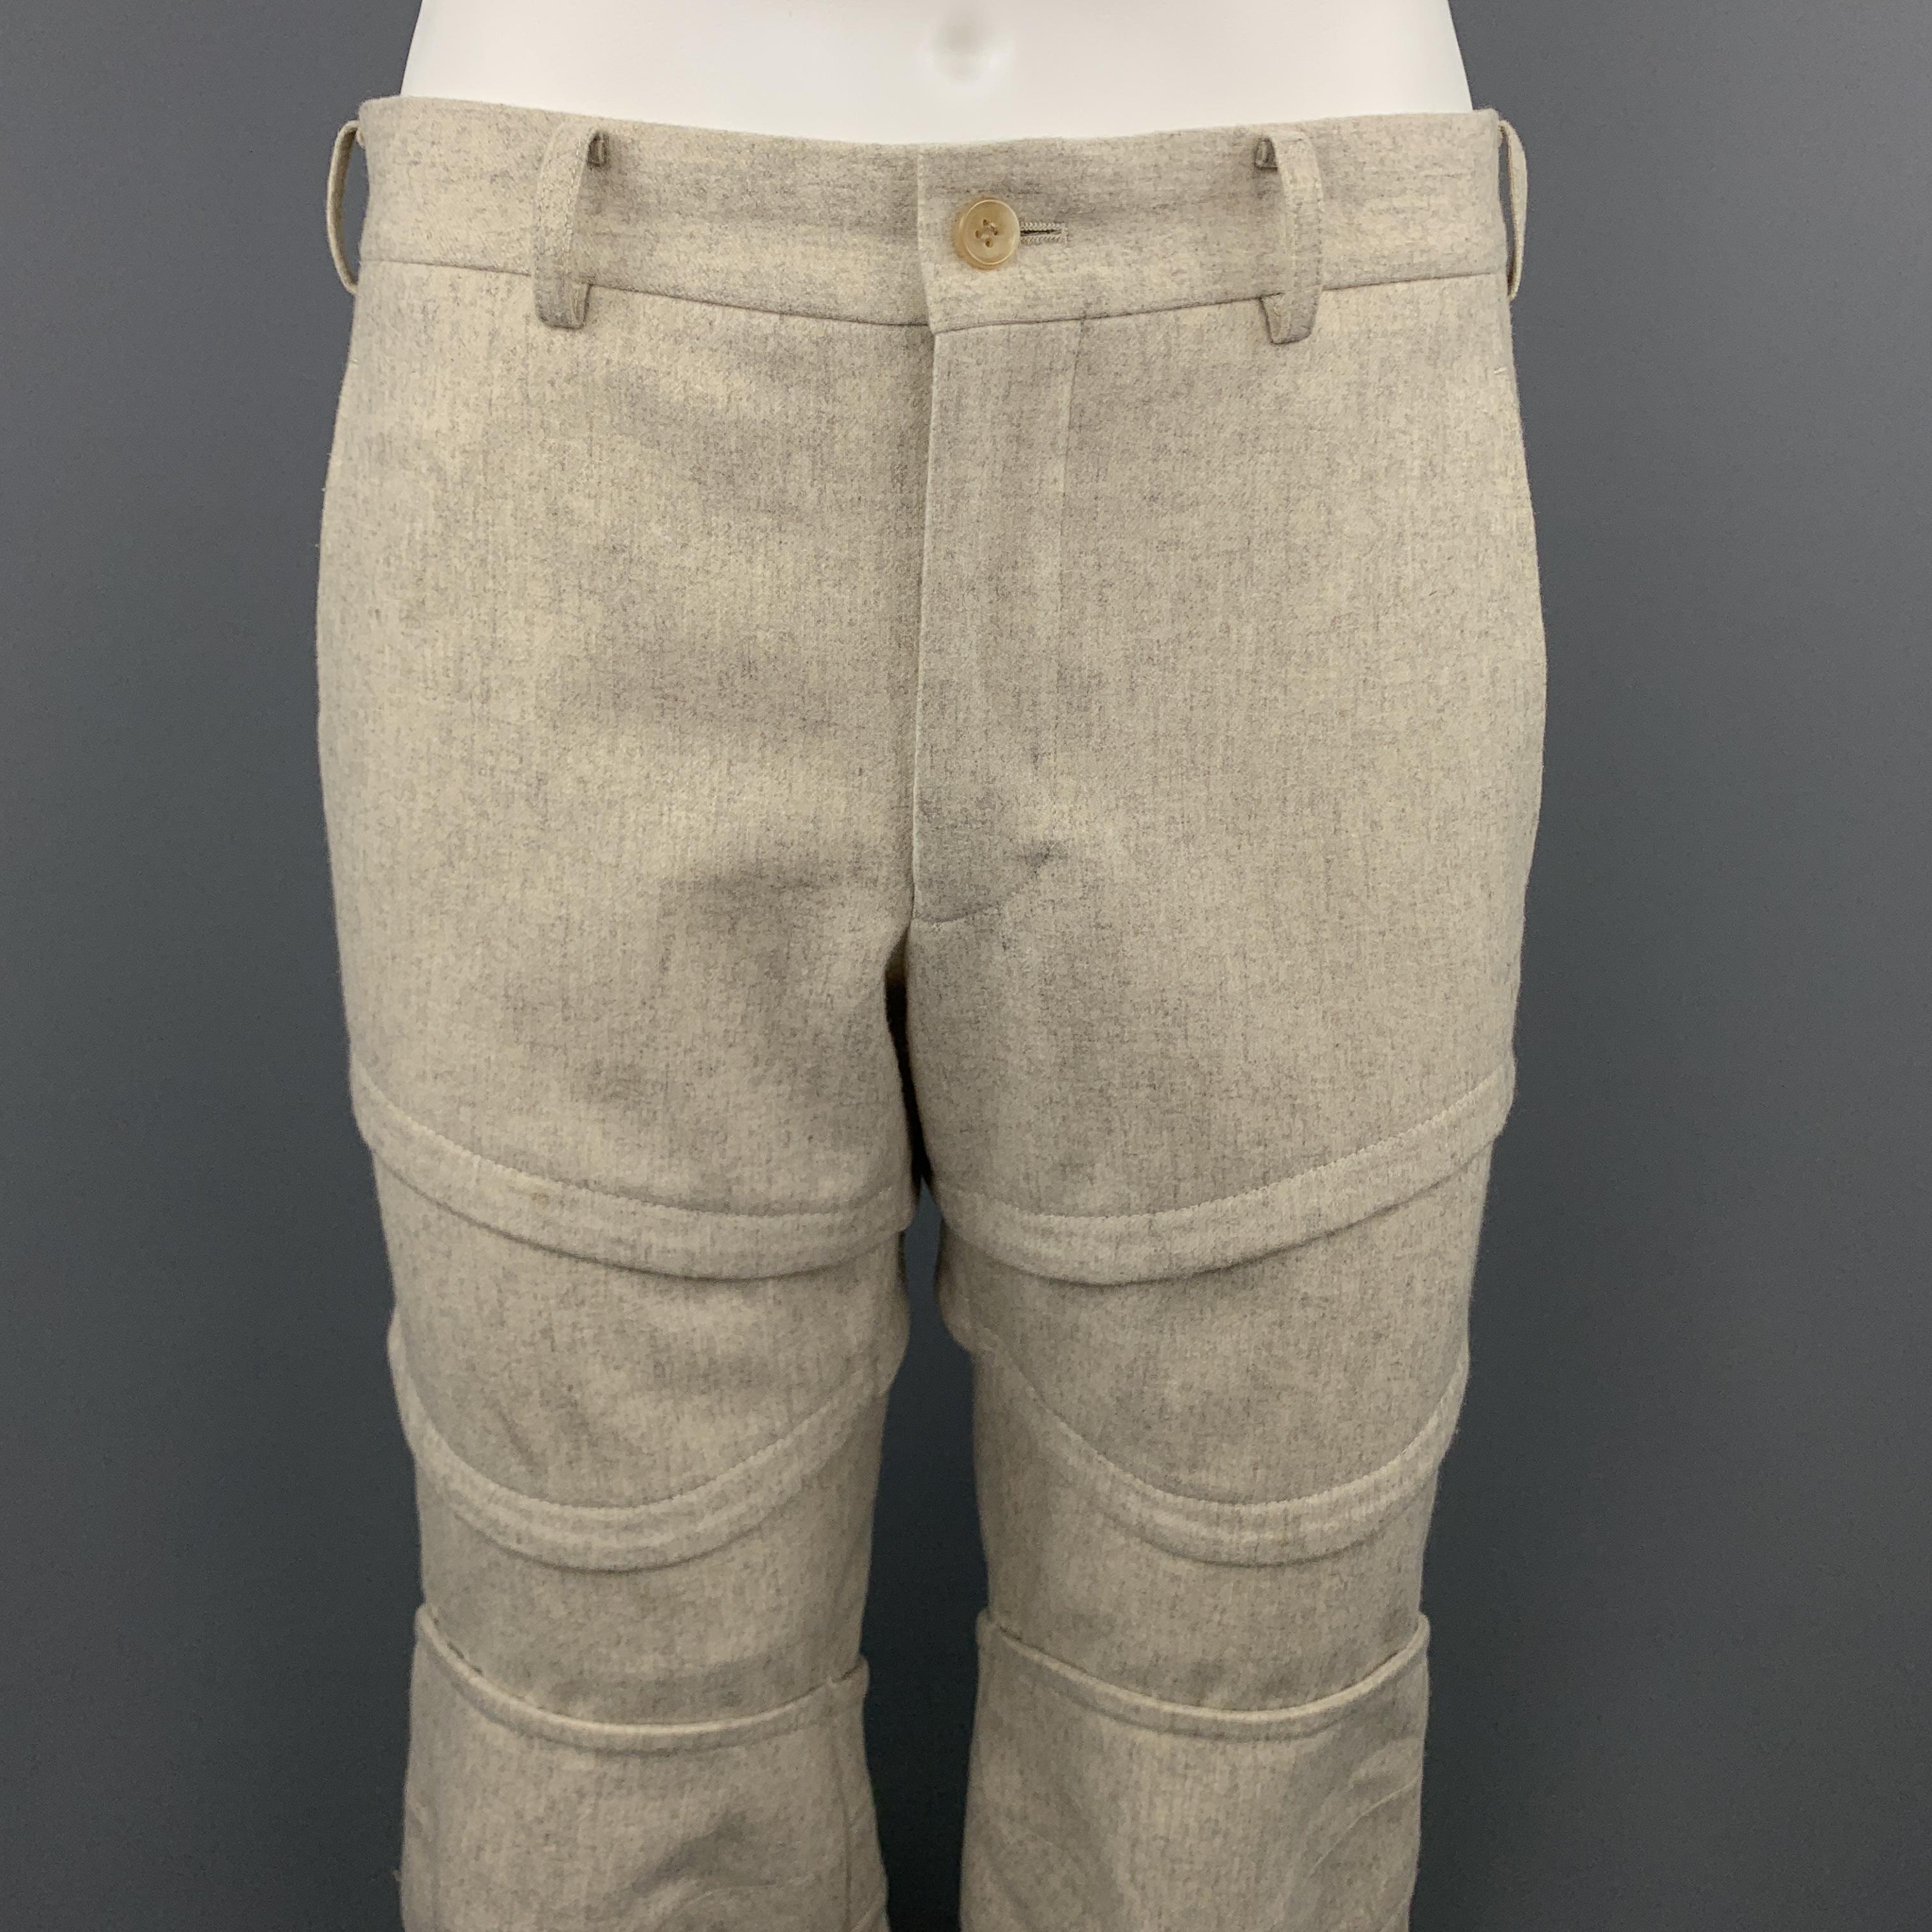 COMME des GARCONS HOMME PLUS pants come in oatmeal beige heathered wool blend flannel with layered armor inspired panels throughout the leg and knee pads. Made in Japan.

Excellent Pre-Owned Condition.
Marked: M  AD 2016

Measurements:

Waist: 34.5